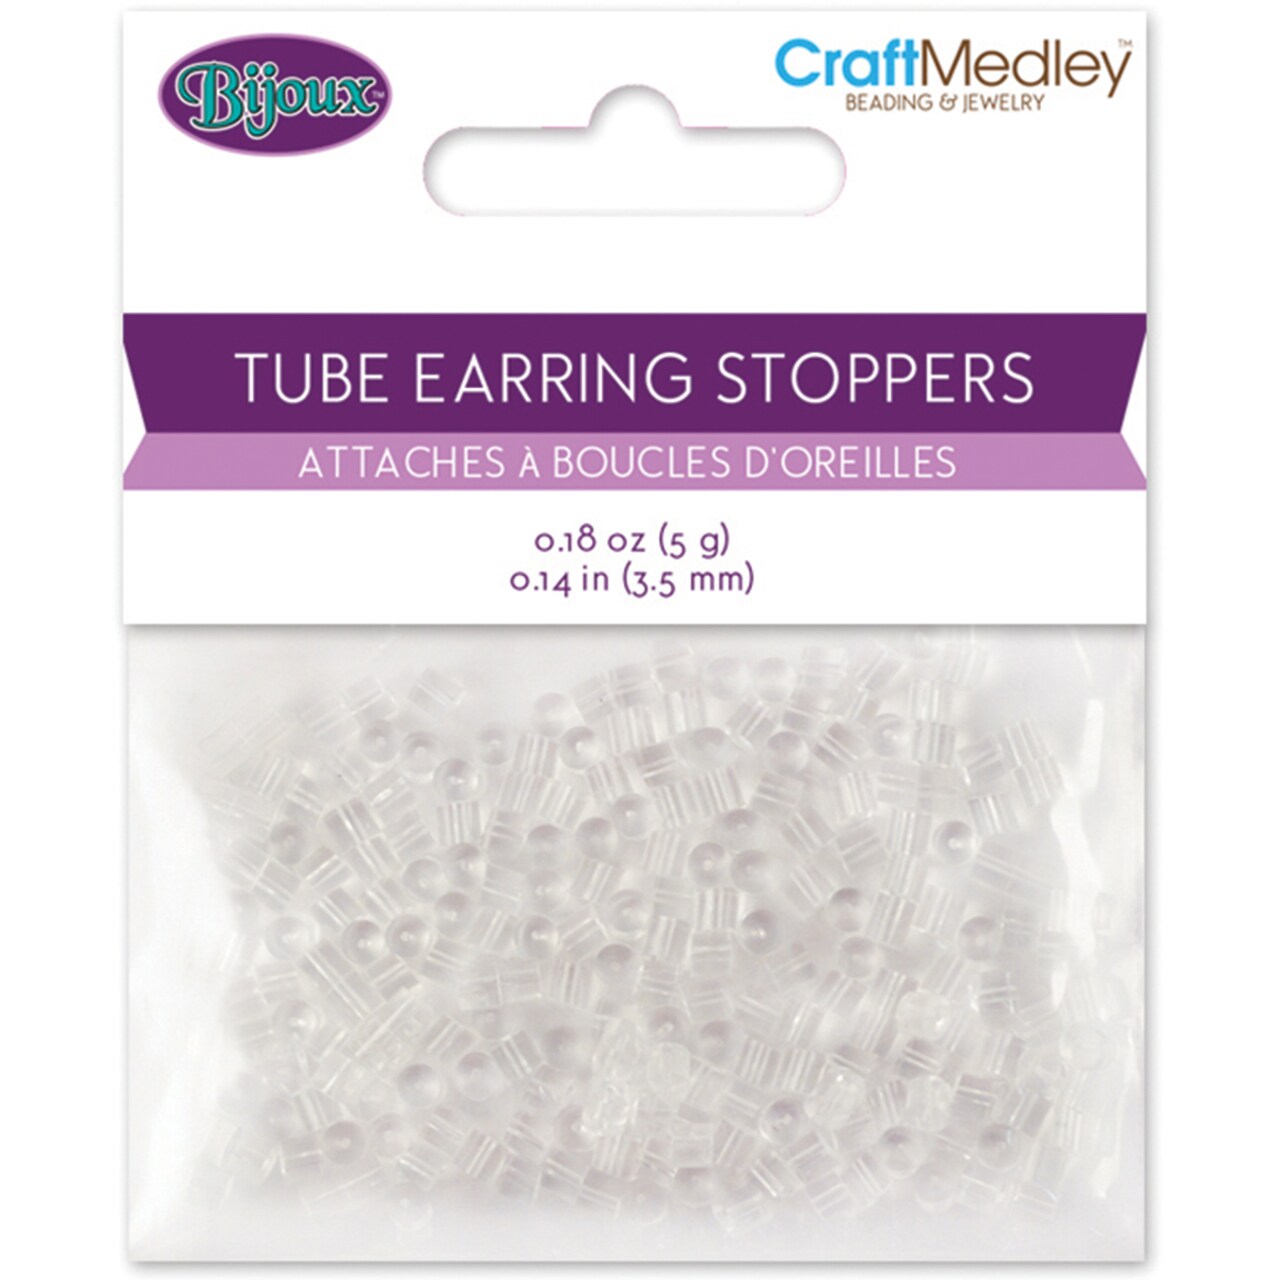 Craft Medley Rubber Tube Earring Stoppers 3.5mm 180/Pkg-Clear